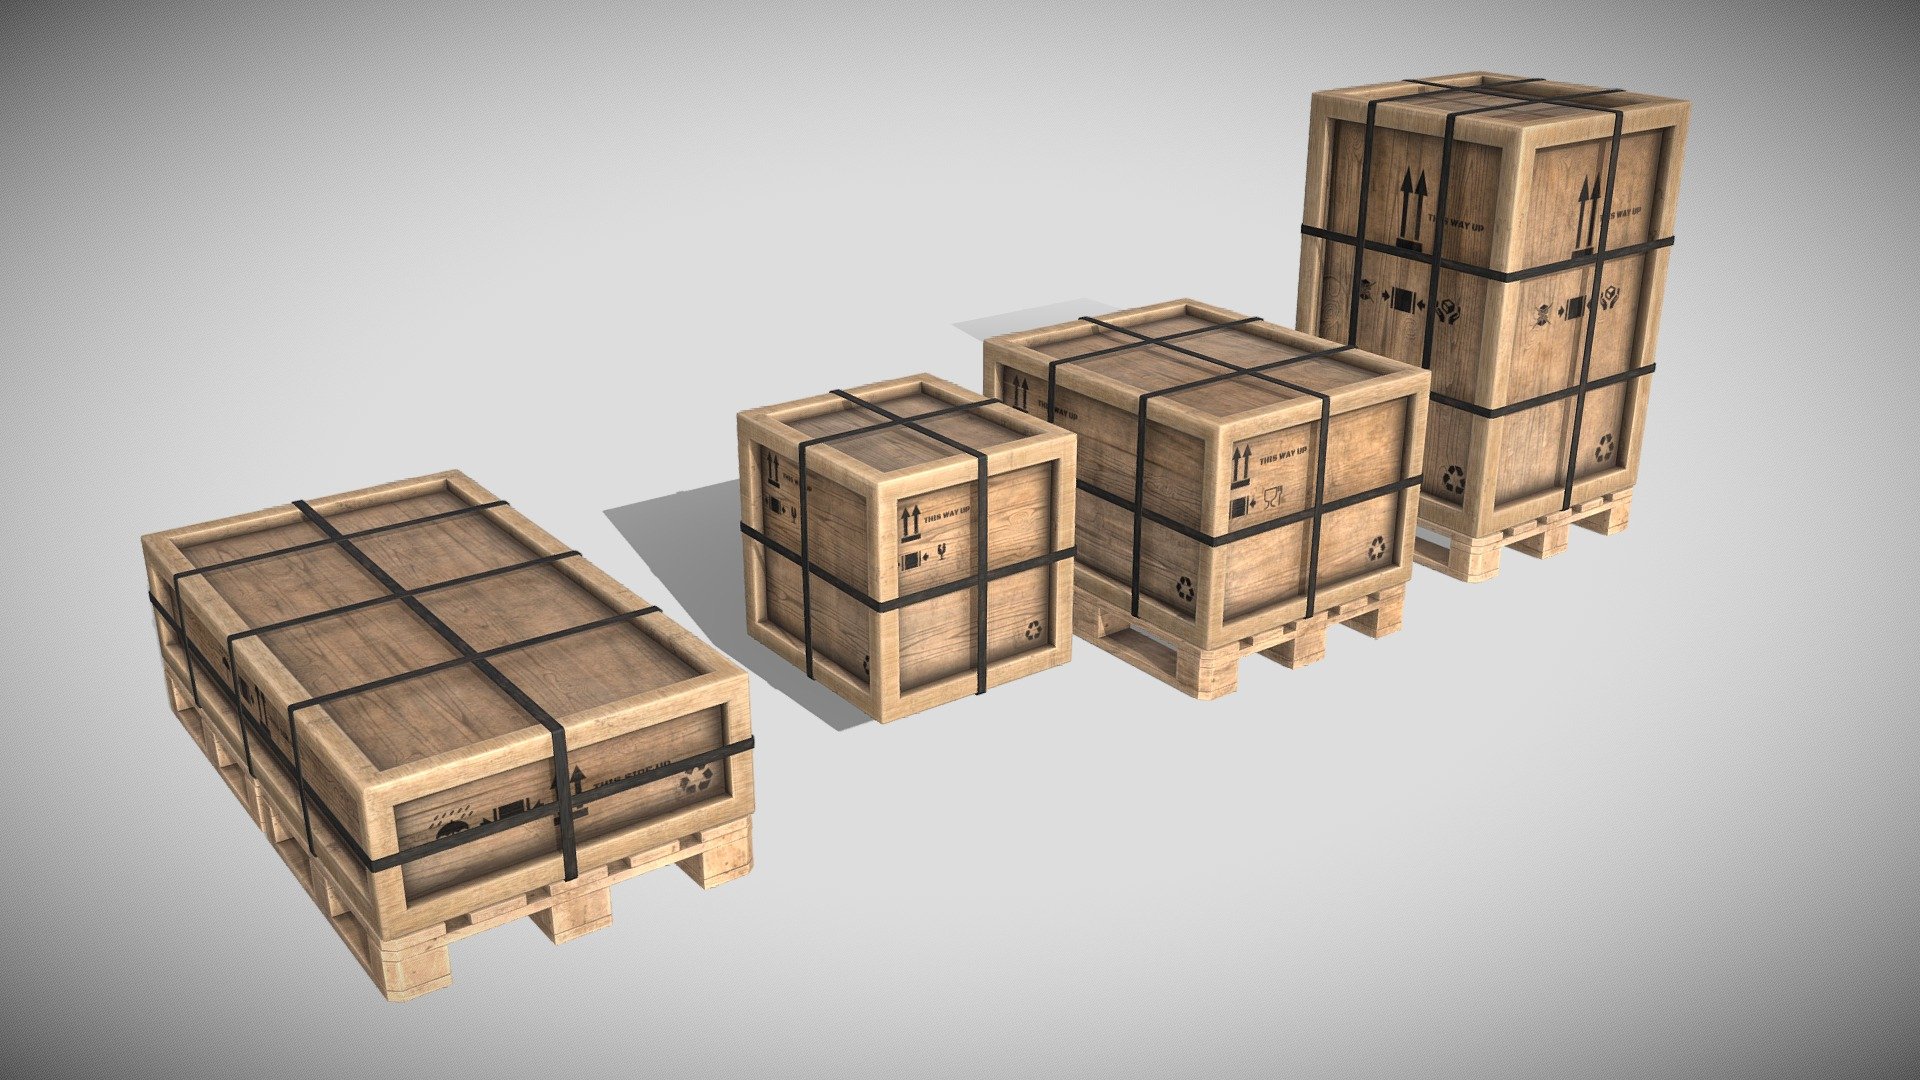 A set of four Cargo cases alongside with two wood palettes. Containing;

-Wide, Tall, Large, Small Cargo cases

-Large and small palettes which are seperate from the cases

-Plastic straps around the cases which you can remove

All of which are modeled and labeled according to referances.

You can buy this set for $5 at CGTrader, or at TurboSquid 3d model